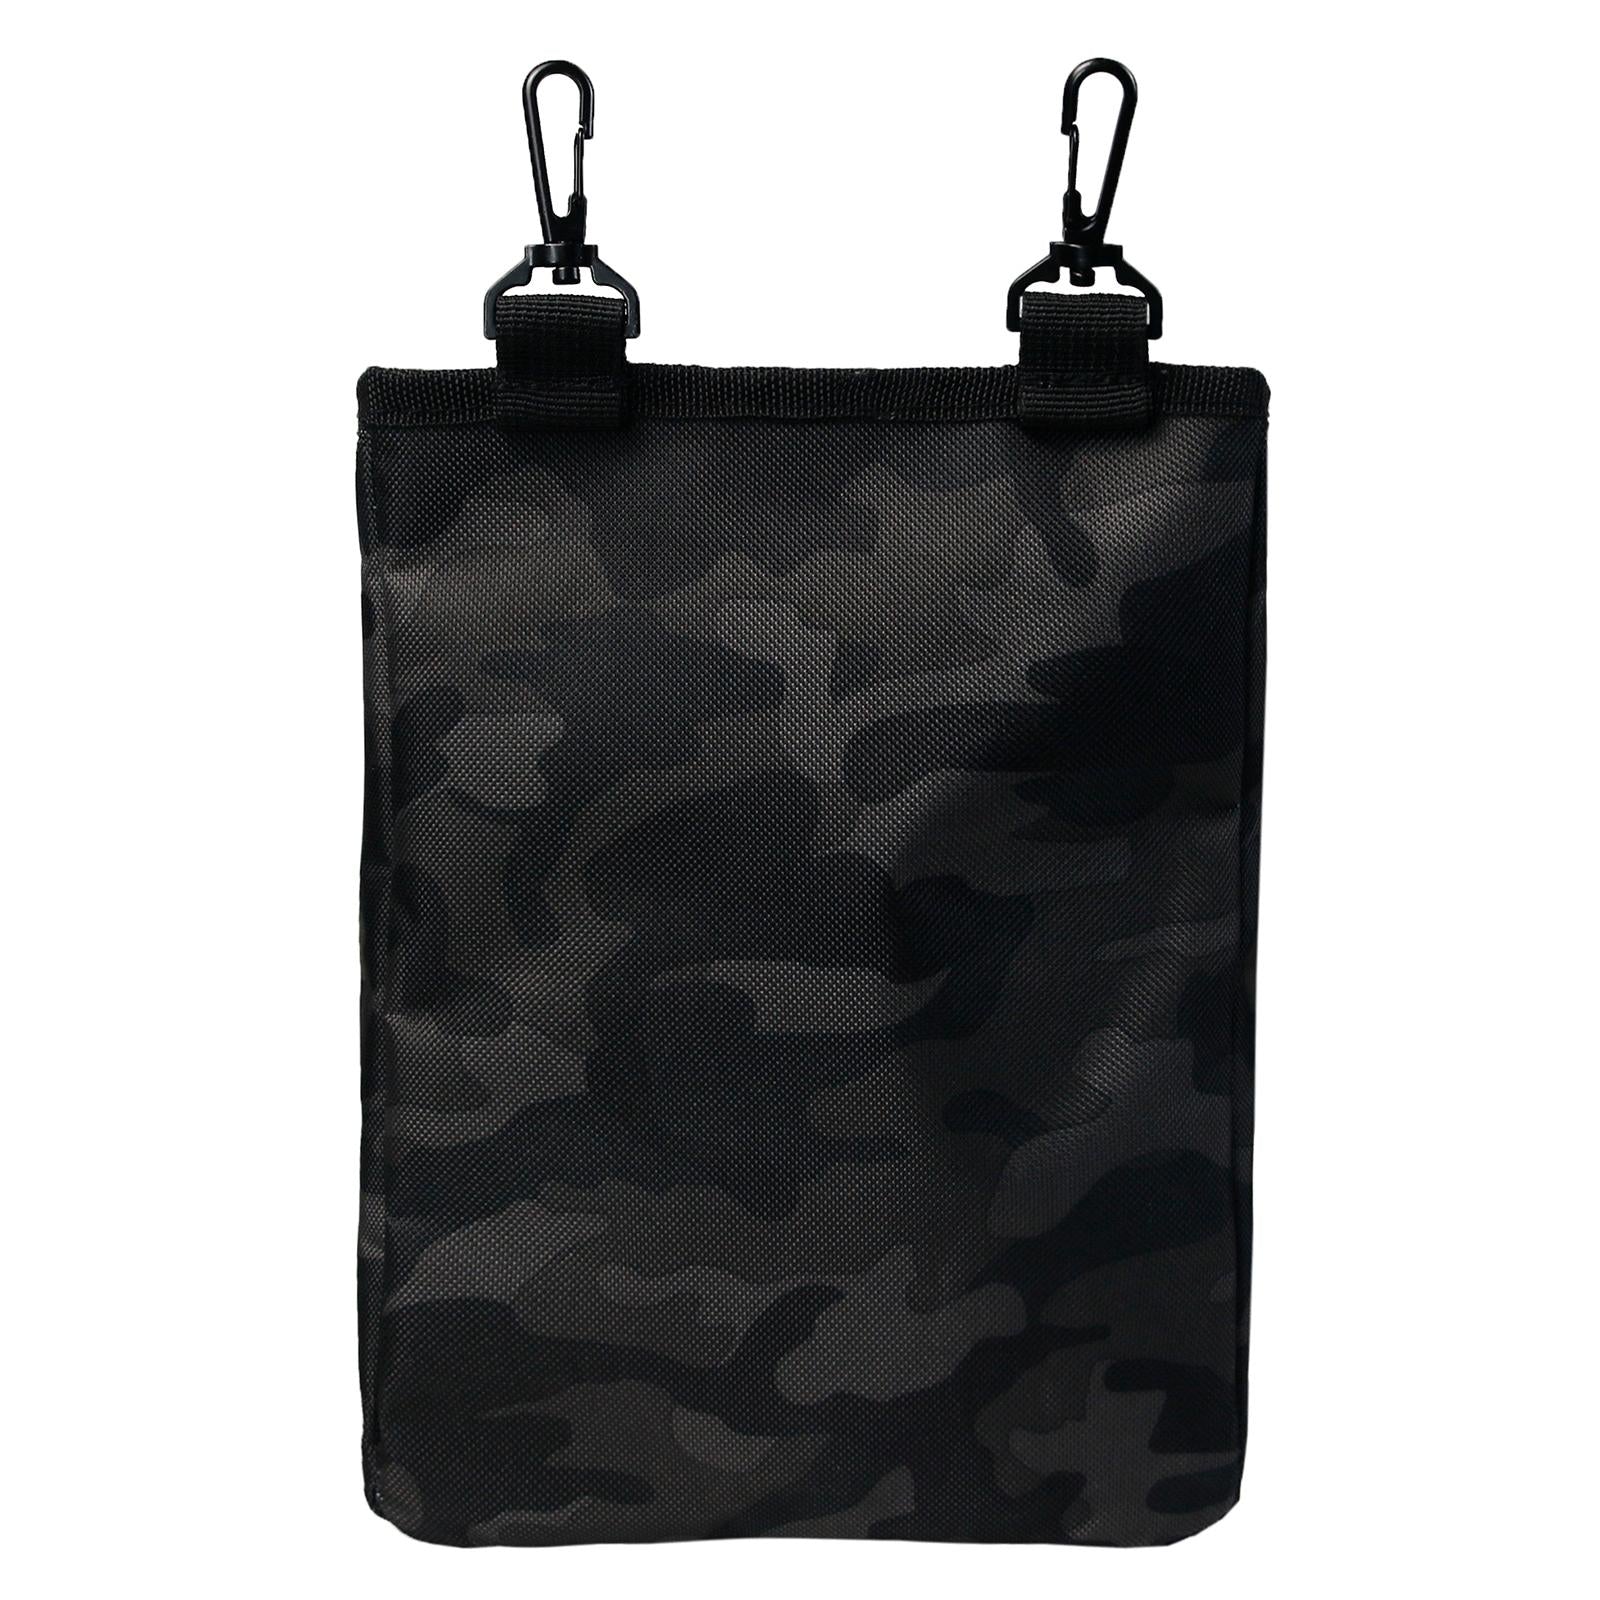 Rabbit Hay Feeder Bag Hay Bag Hanging Pouch Feeder 2 Holes for Guinea Pig black camouflage